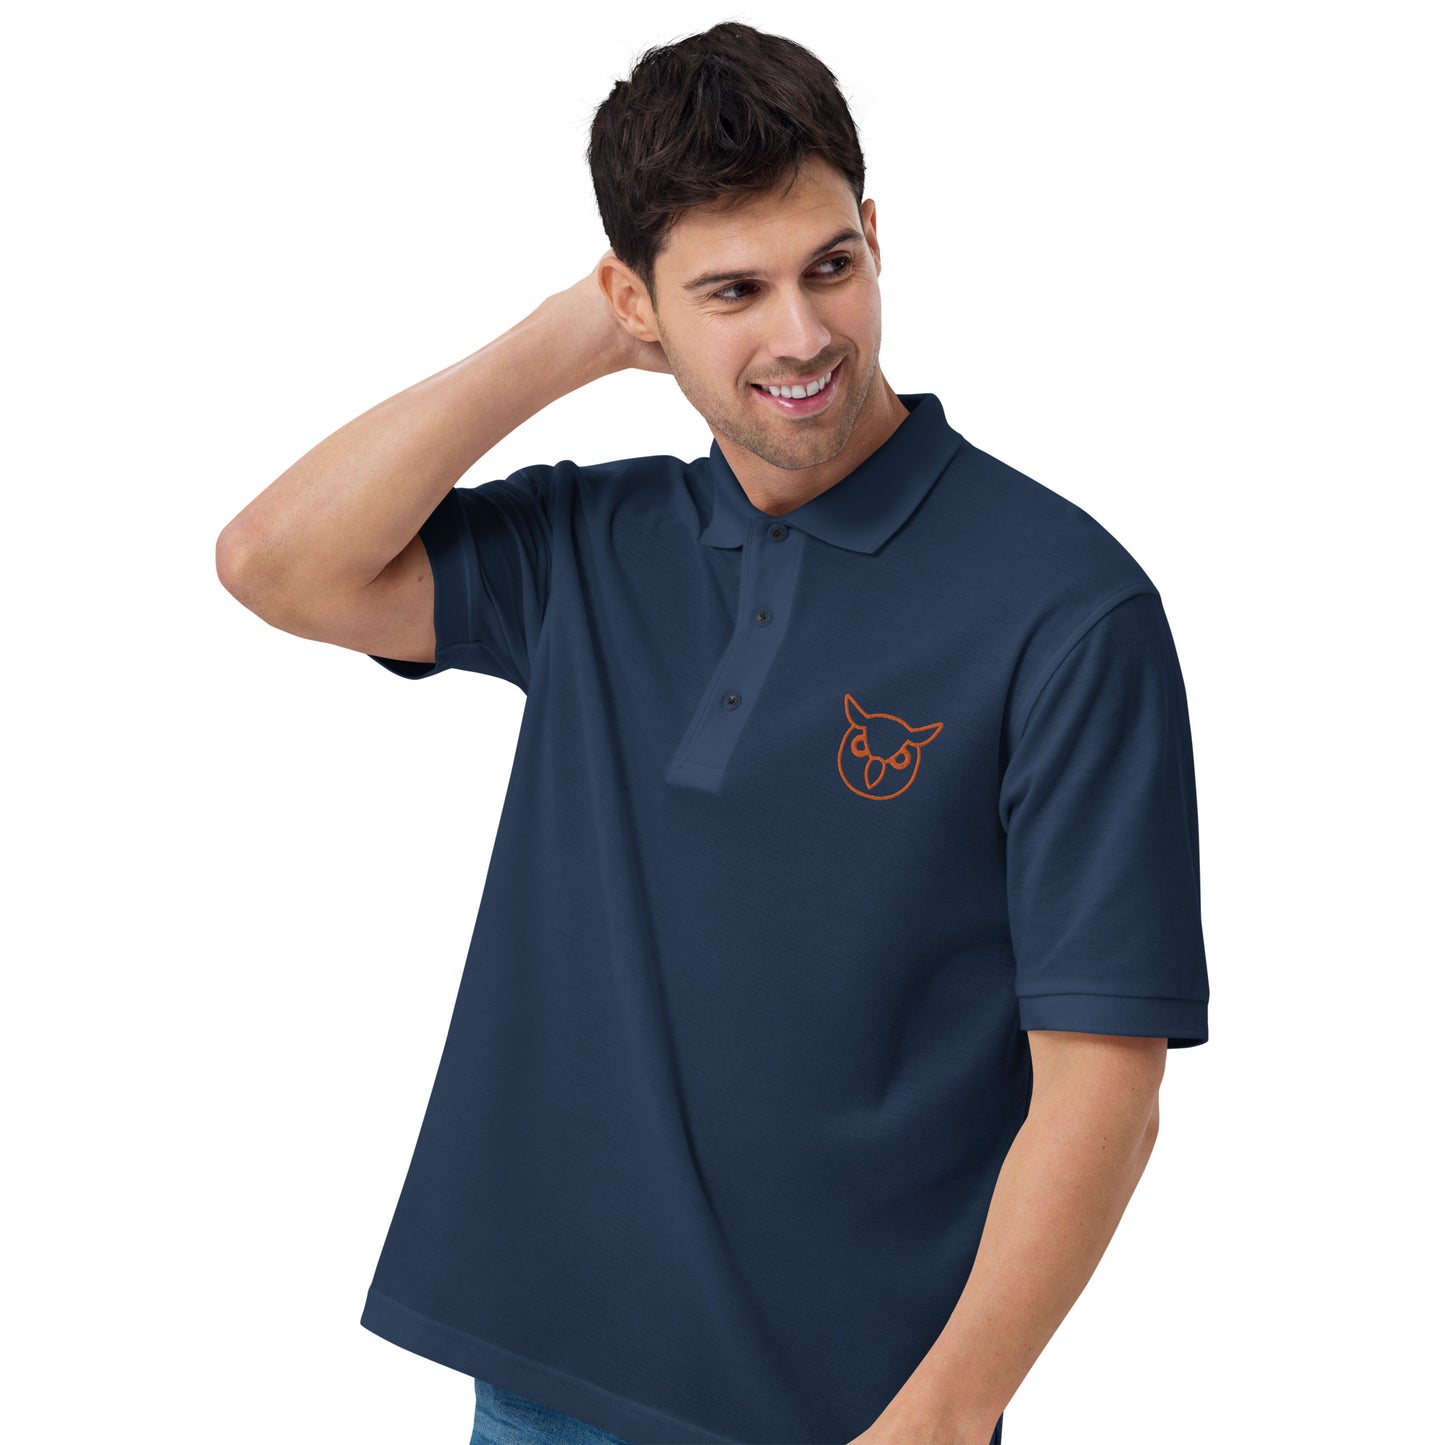 Men with navy poloshirt with on front a owl in brown embroidered